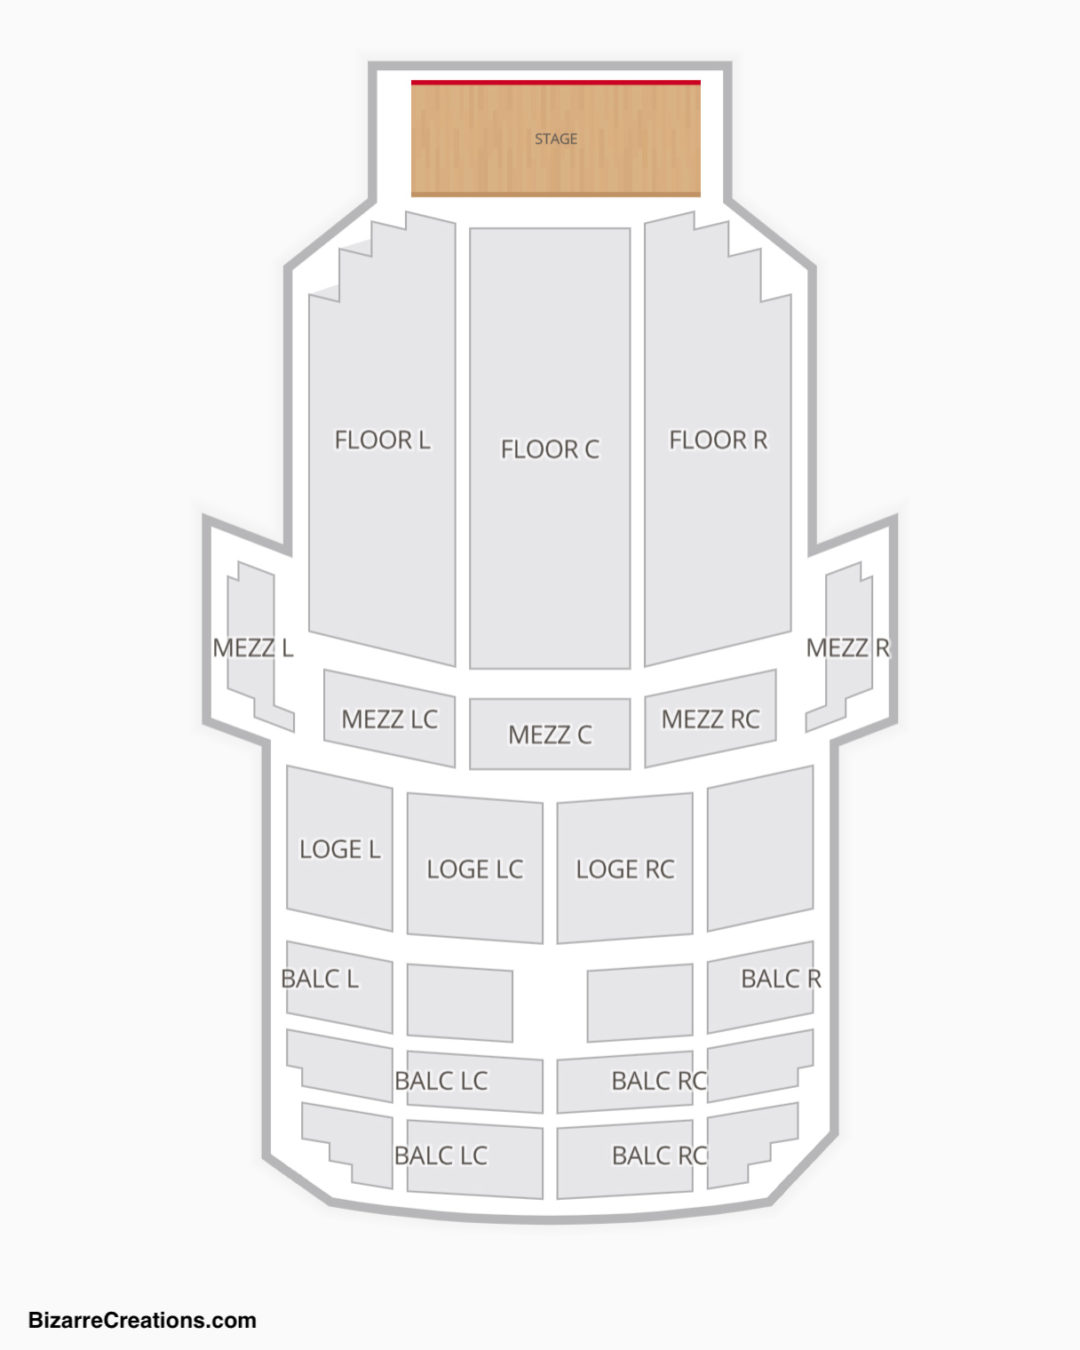 The Fisher Center Seating Chart